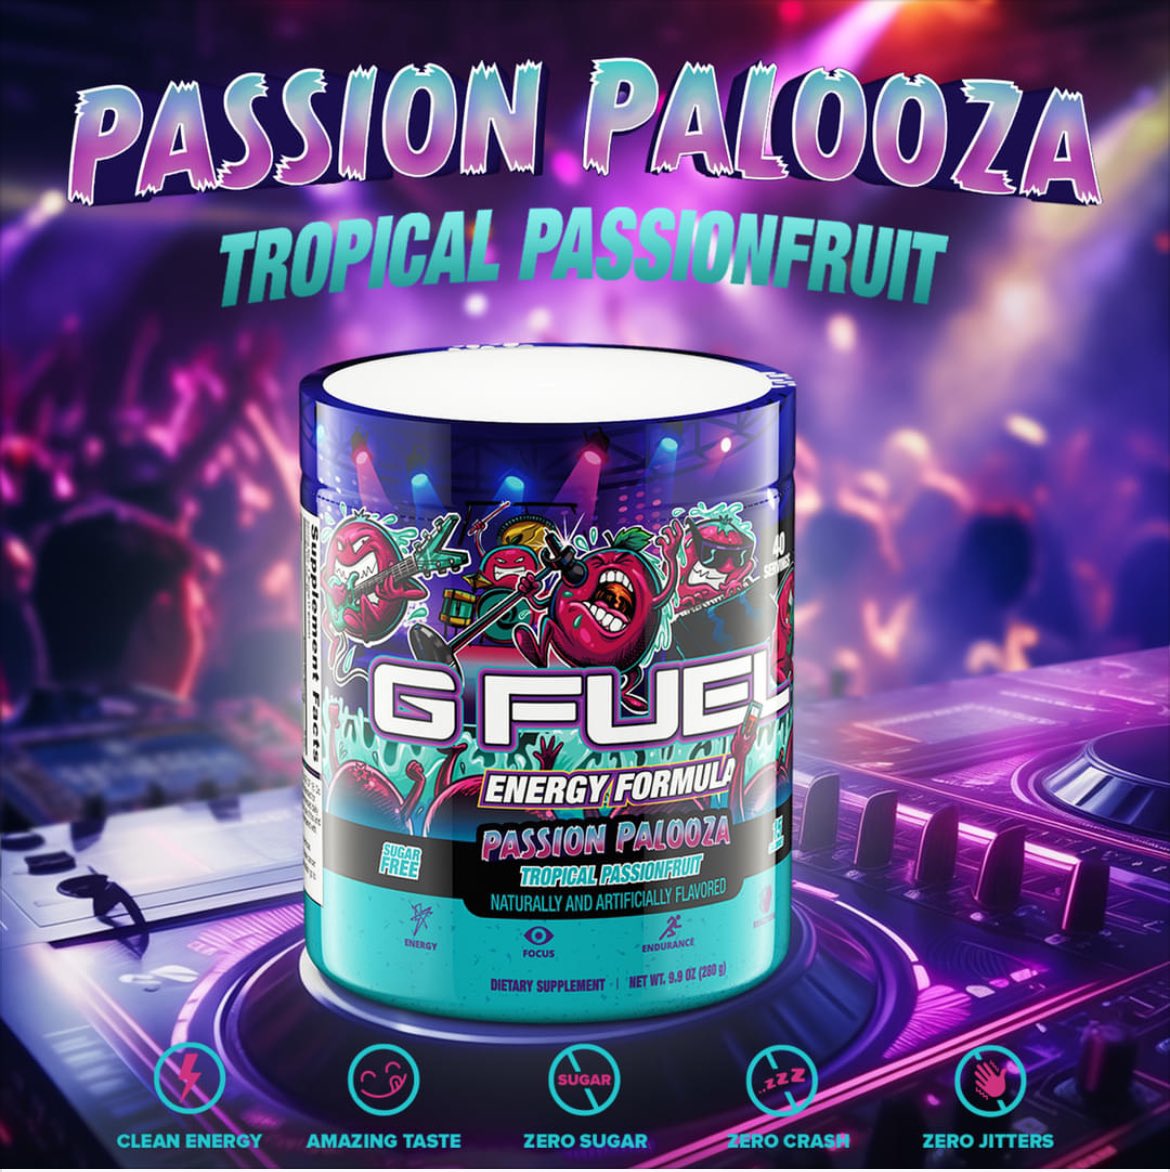 🔥 Exciting News! Just snagged the brand new @GFuelEnergy flavor 'Passion Palooza' from TikTok shop! 😍Get ready for an epic GFUEL flavor review coming soon on my streams! Stay tuned for the taste explosion! 💥 #GFUEL #NewFlavor #PassionPalooza #TikTokShop #GamingFuel #yetionkick